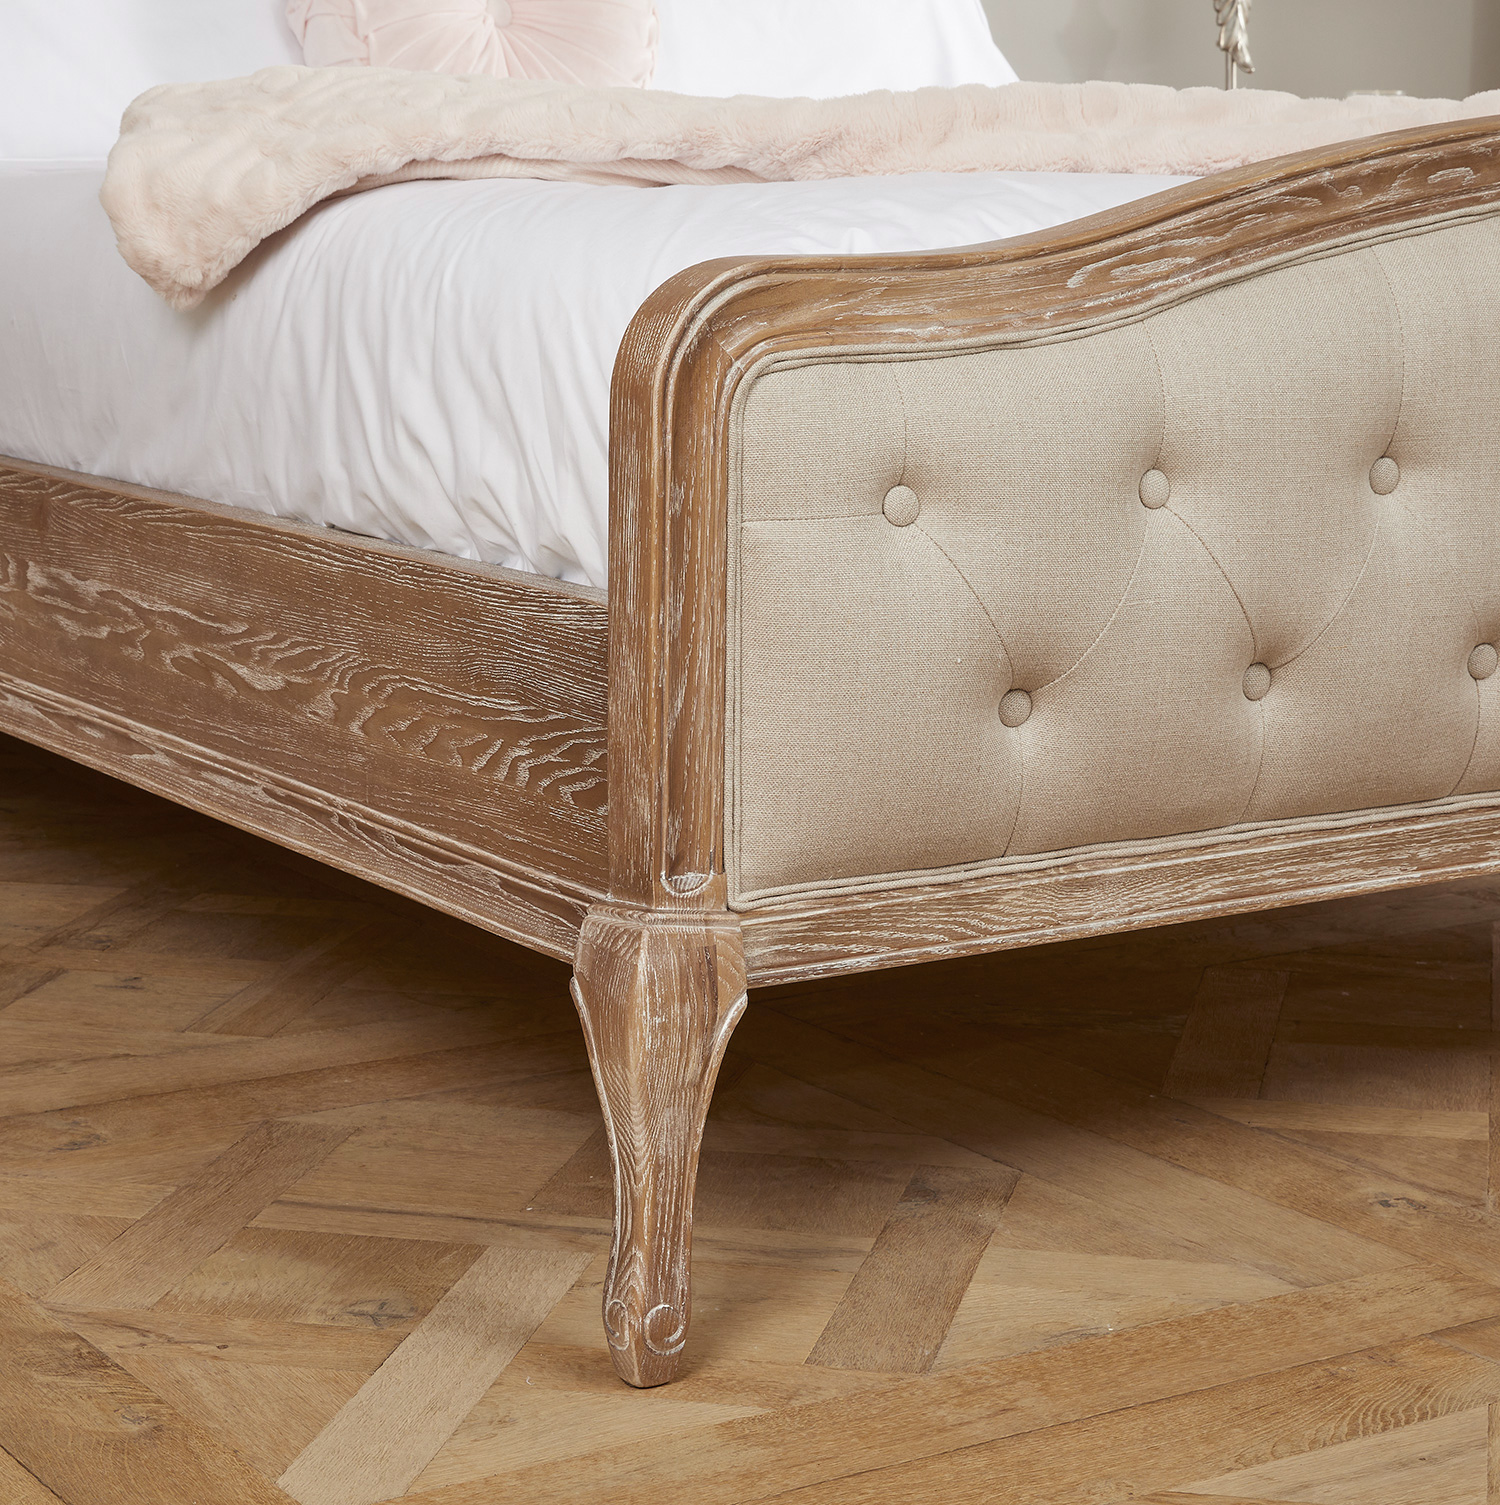 Arielle French Weathered Limed Ash Buttoned Upholstered High Foot Board Bed – Super King Size